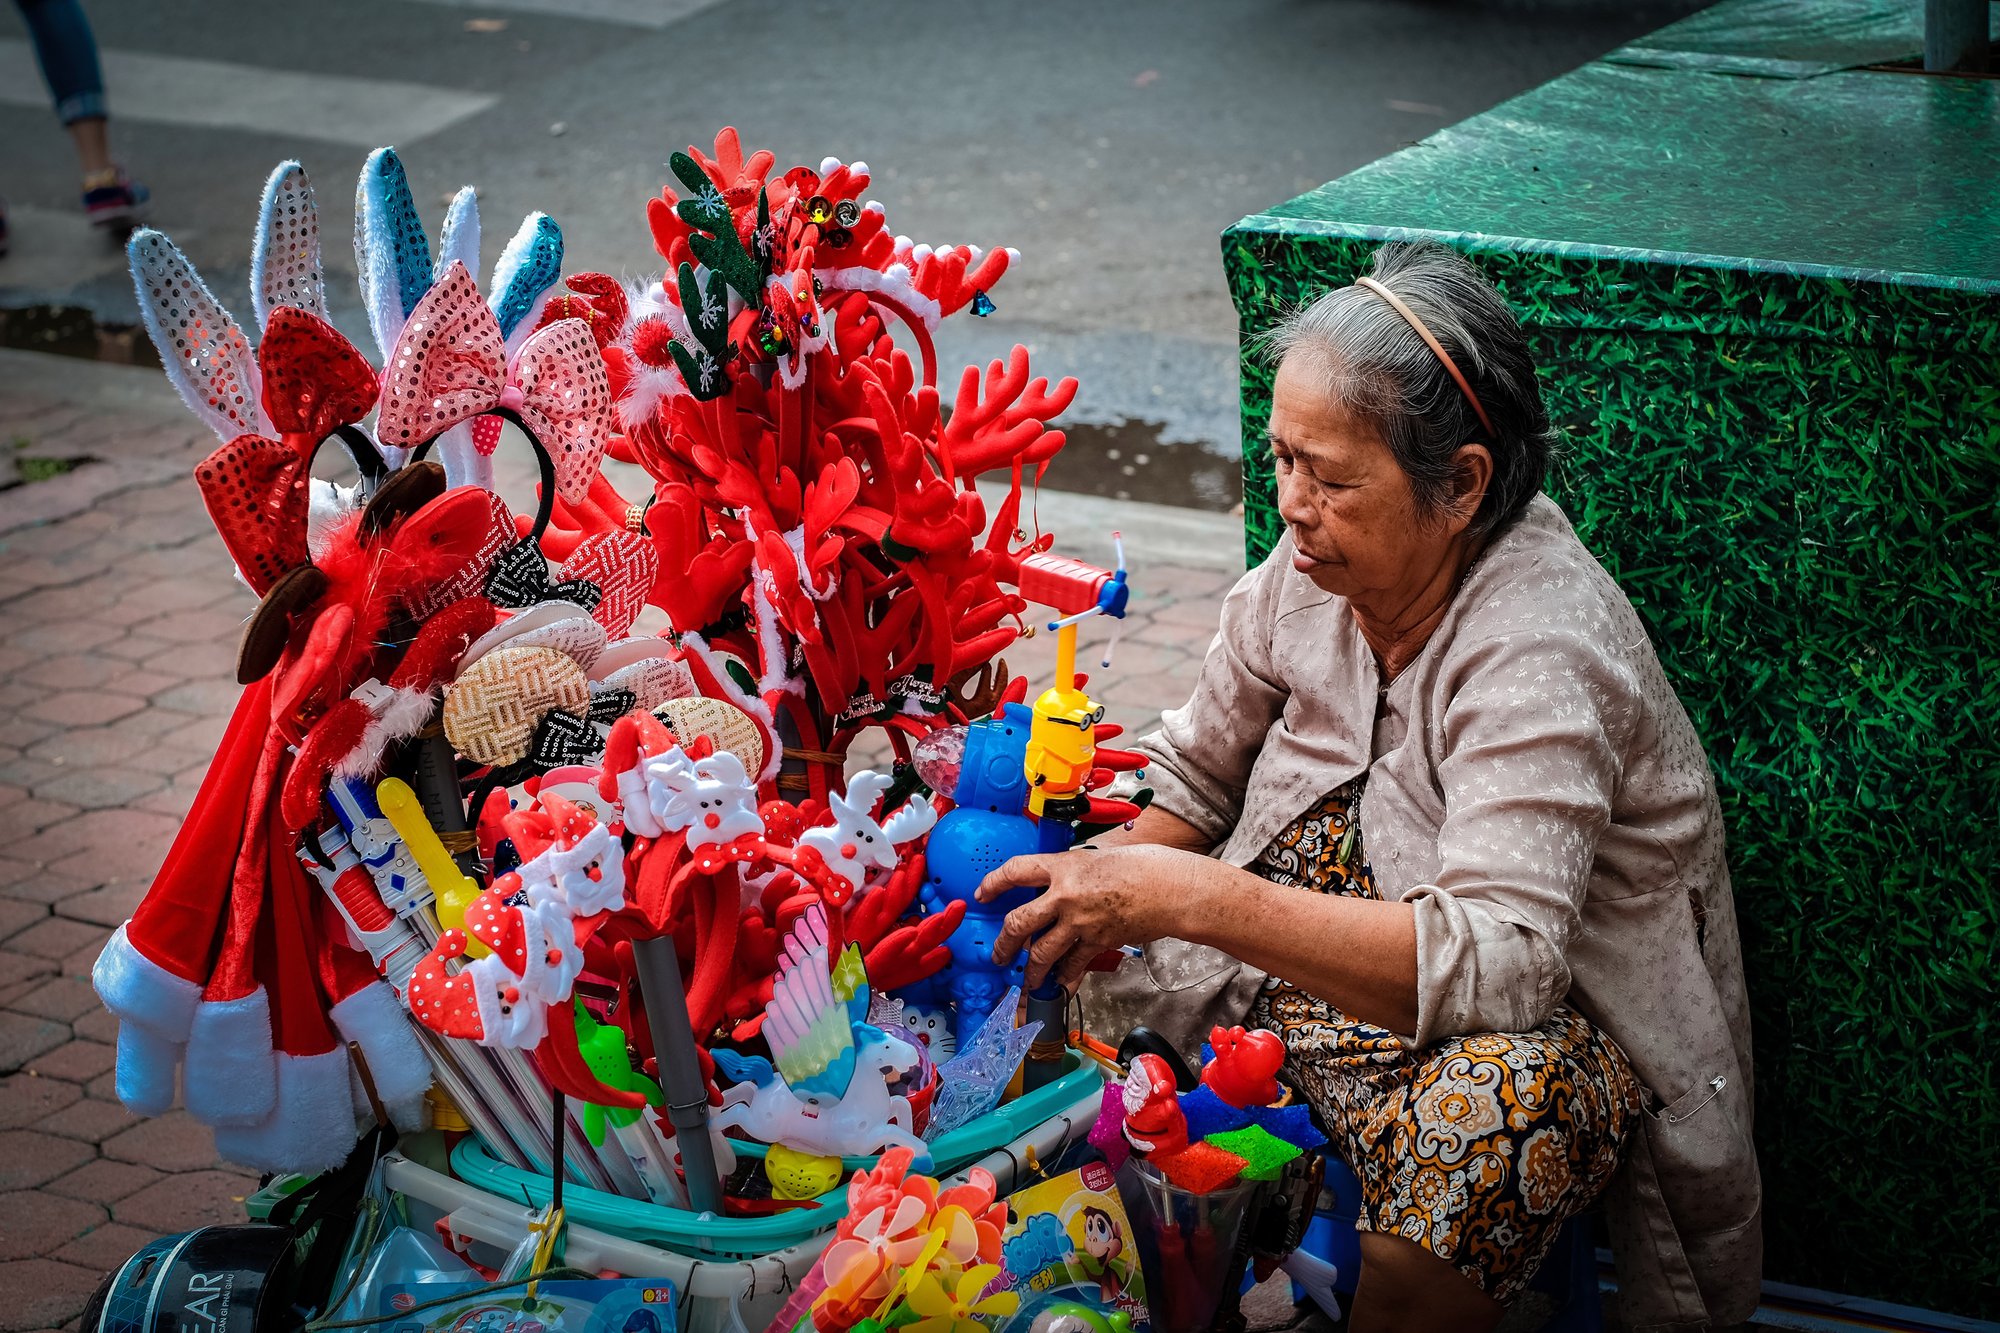 An old lady selling toys on the street